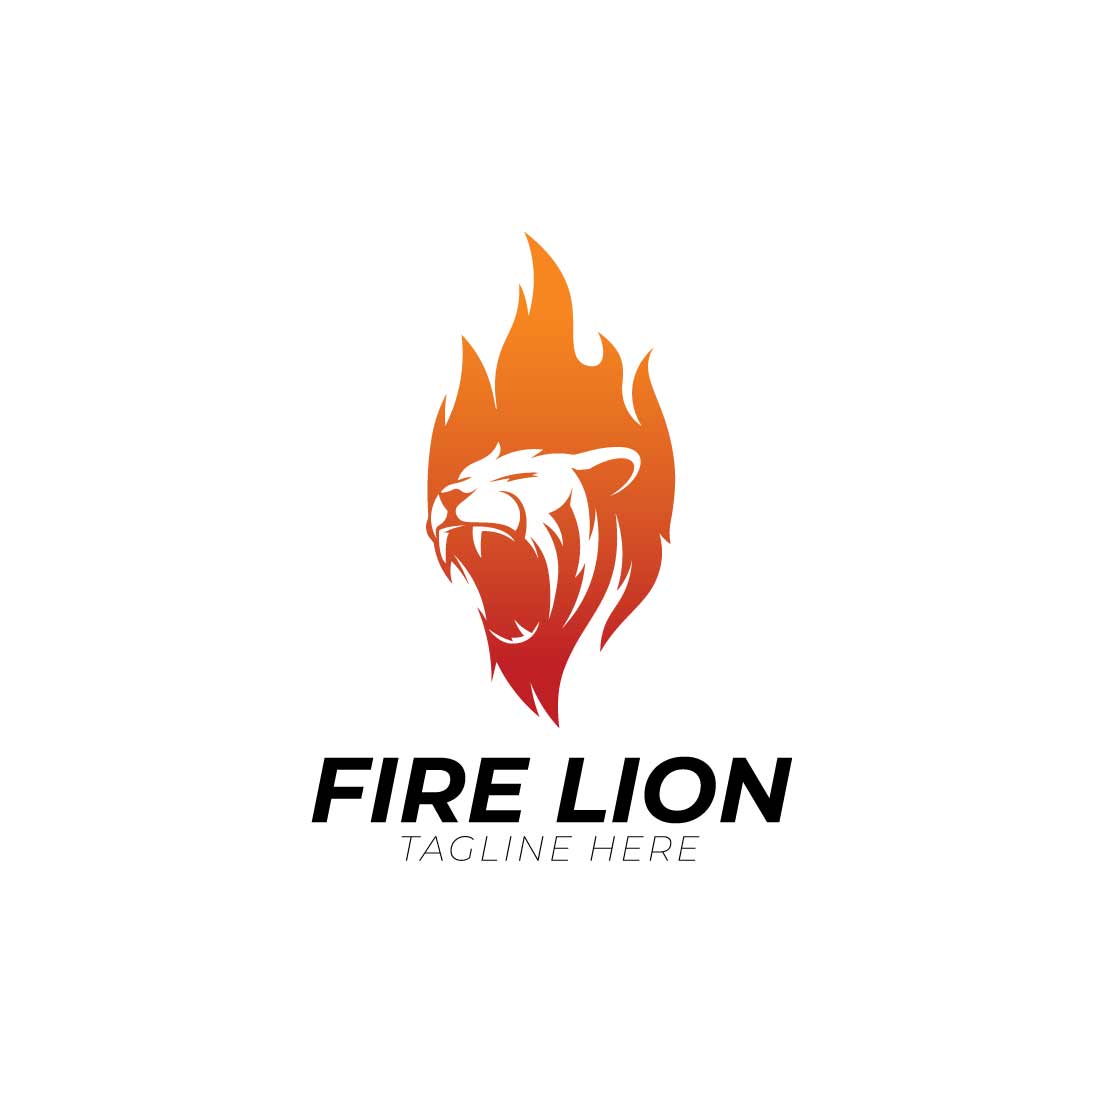 Initial Fire Lion logo cover image.